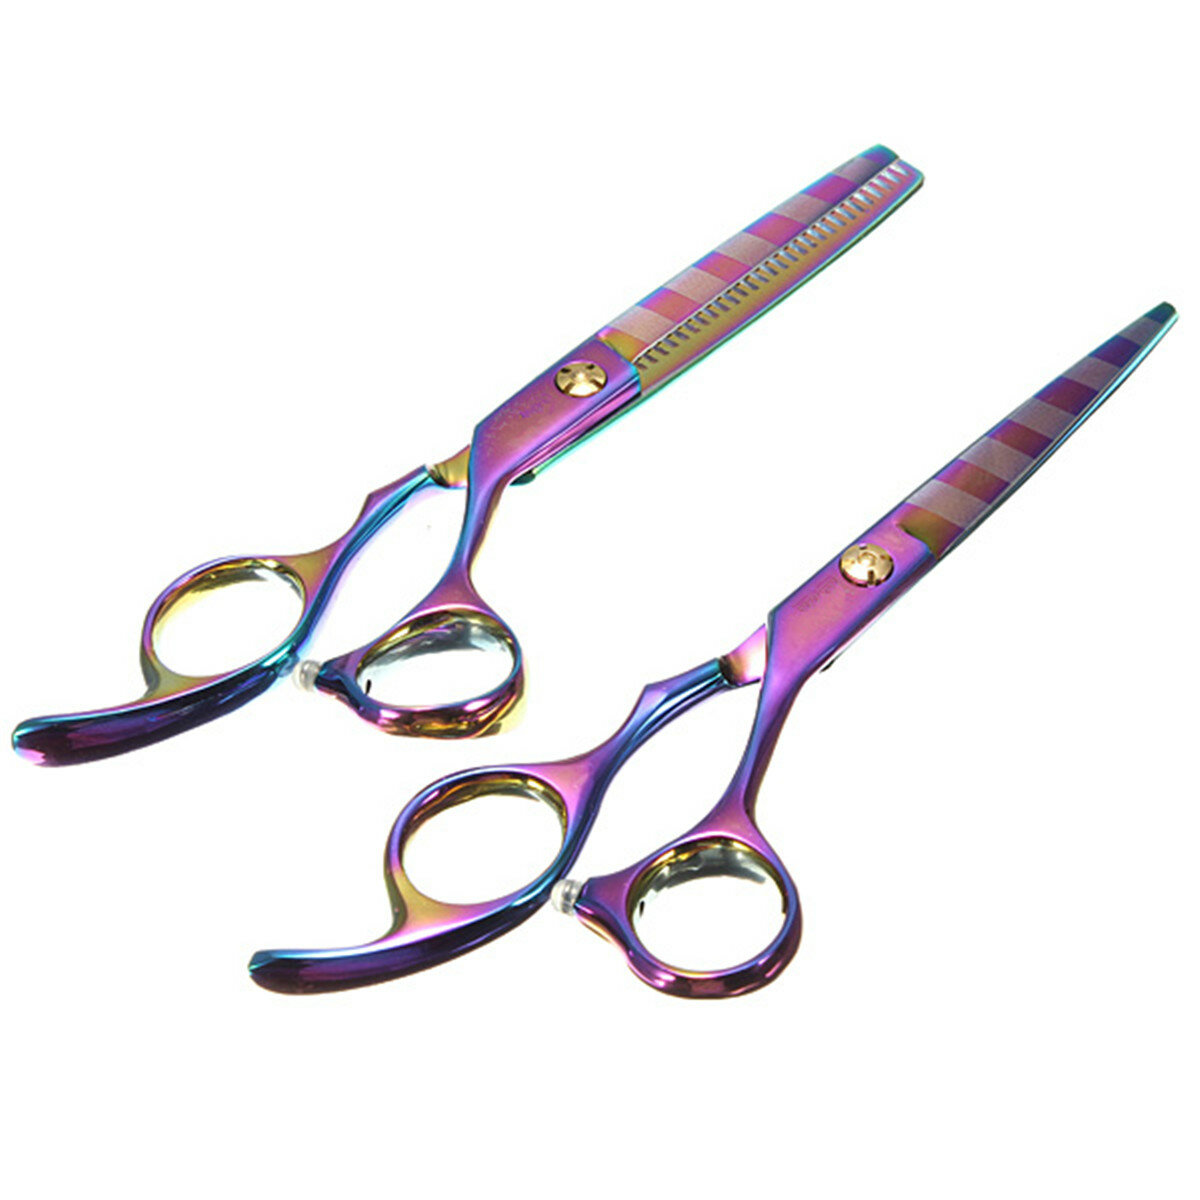 

3 Pcs/Set Professional Stainless Steel Hair Cutting Thinning Scissors Barber Tool Hair Scissor Comb Set Hairdressing She